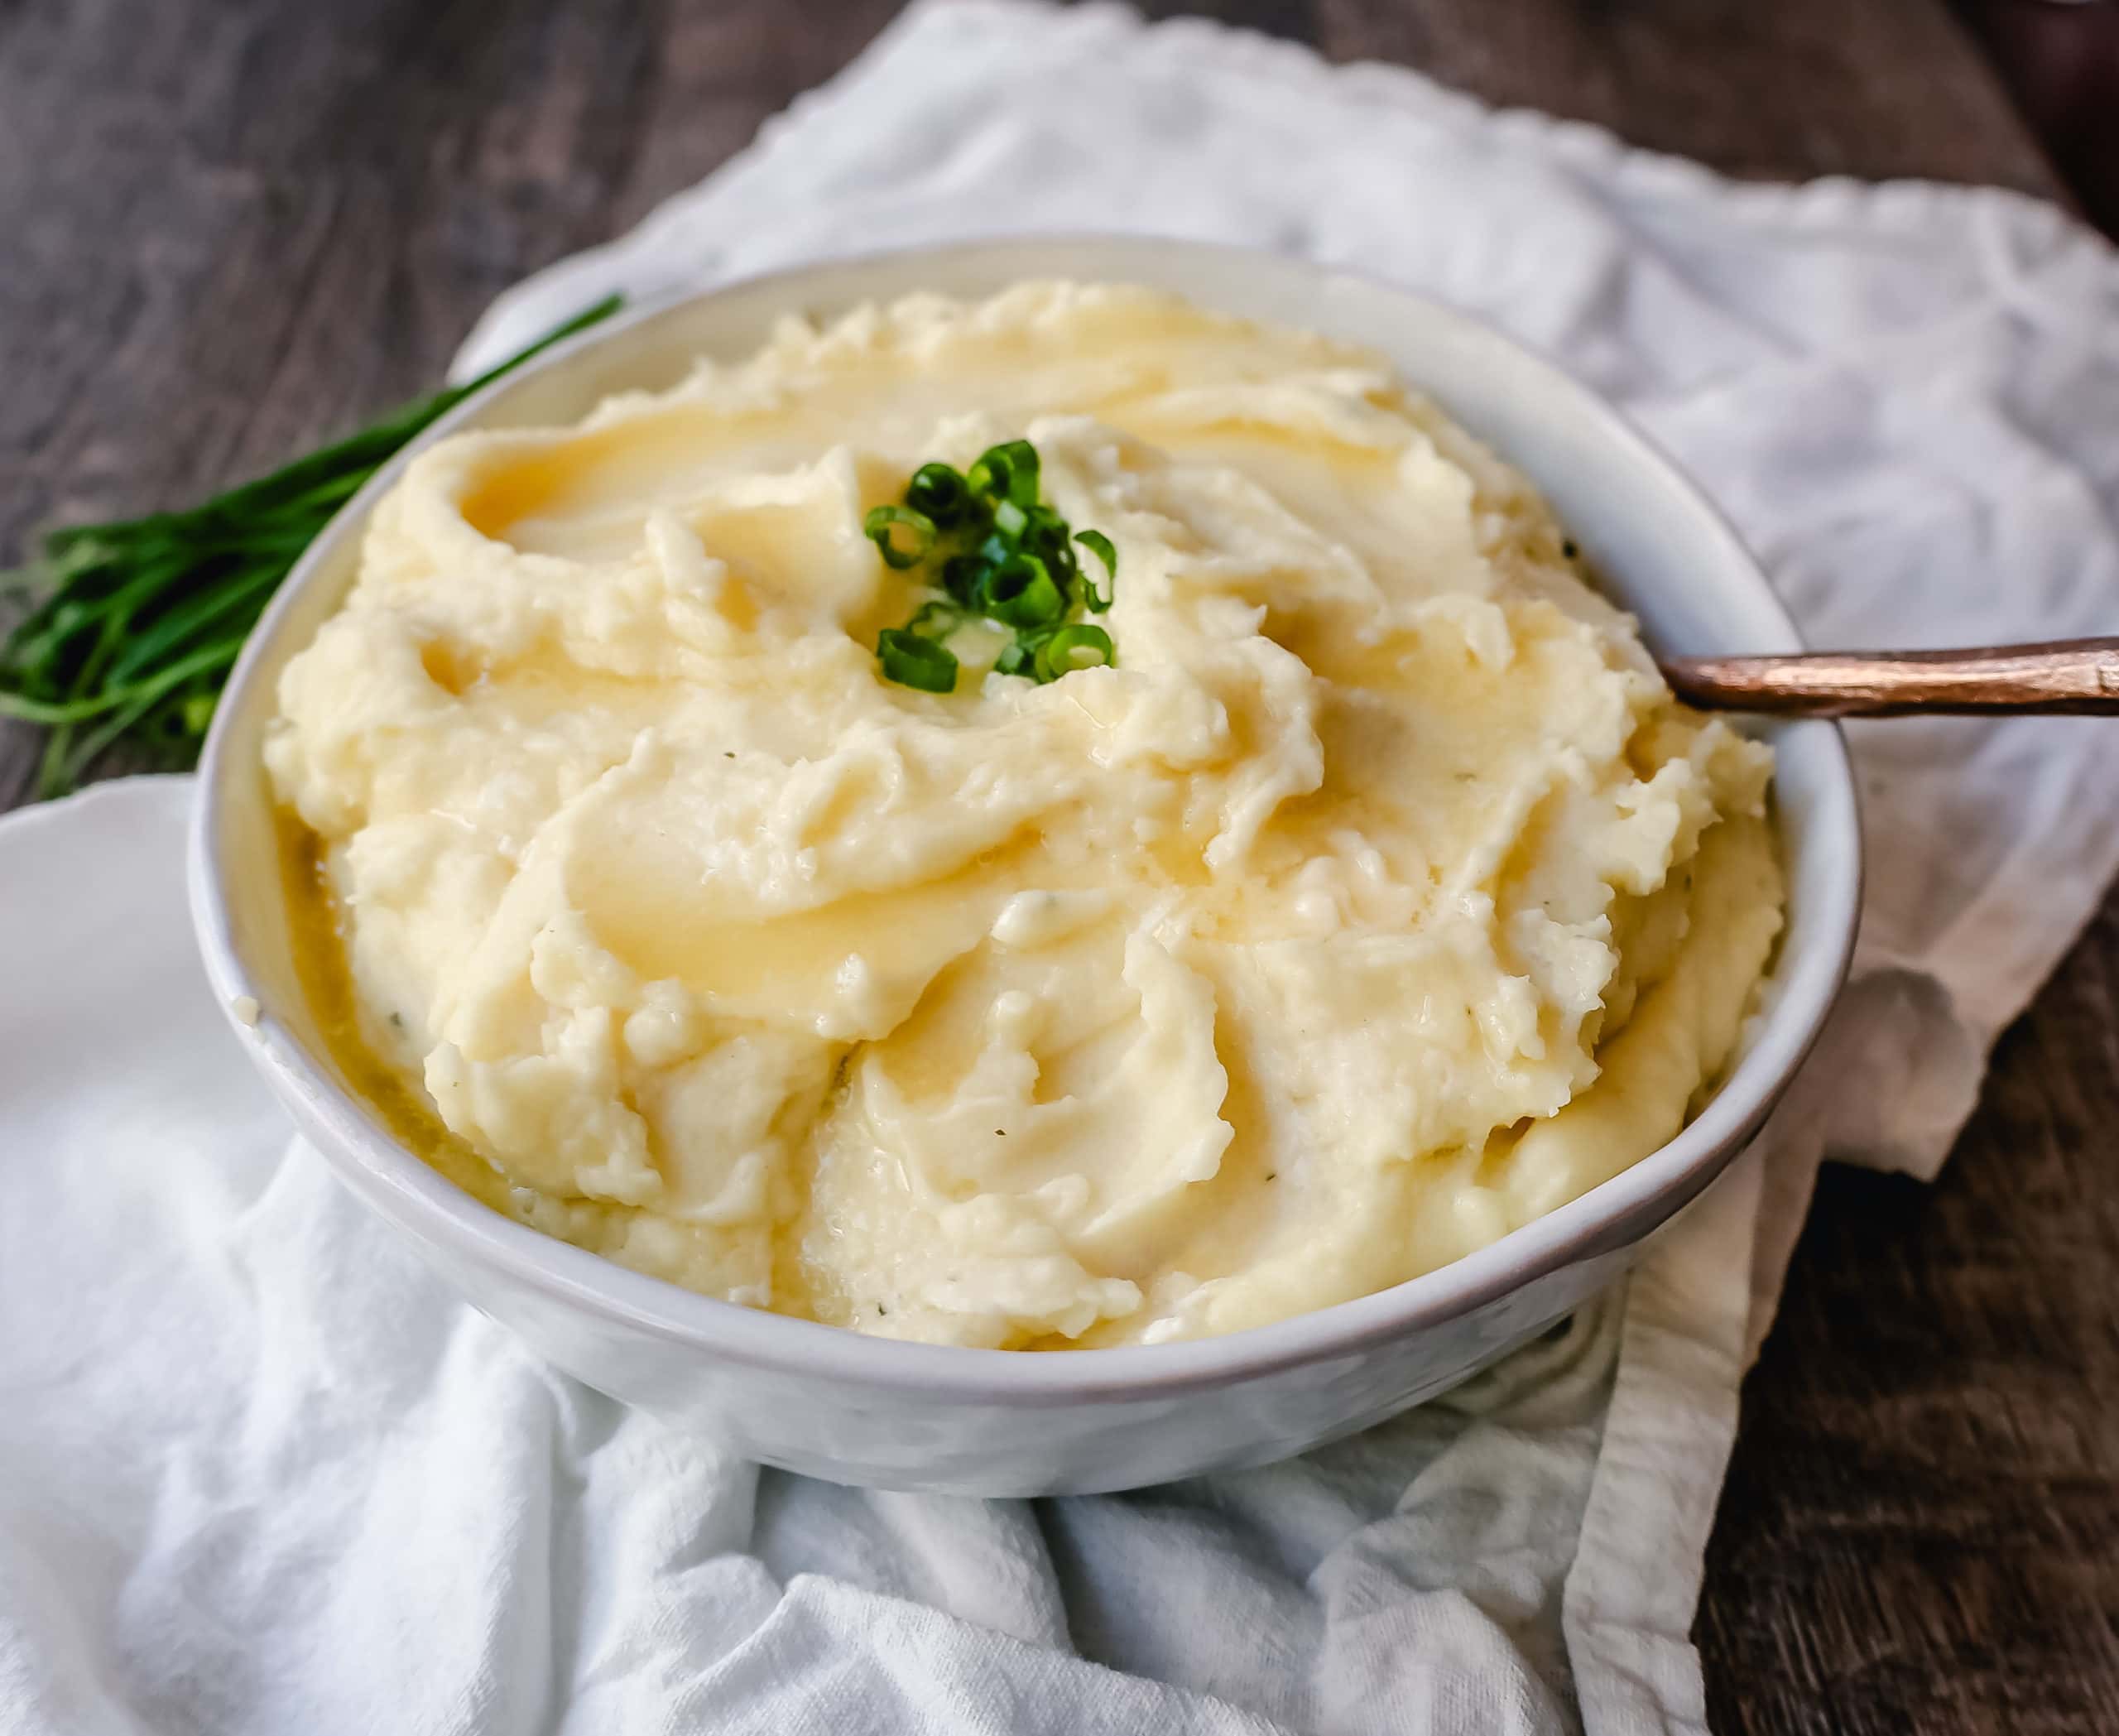 Boursin Cheese Creamy Mashed Potatoes. Buttery, creamy homemade mashed potatoes with garlic and herb Boursin cheese. So flavorful, you don't even need the gravy!